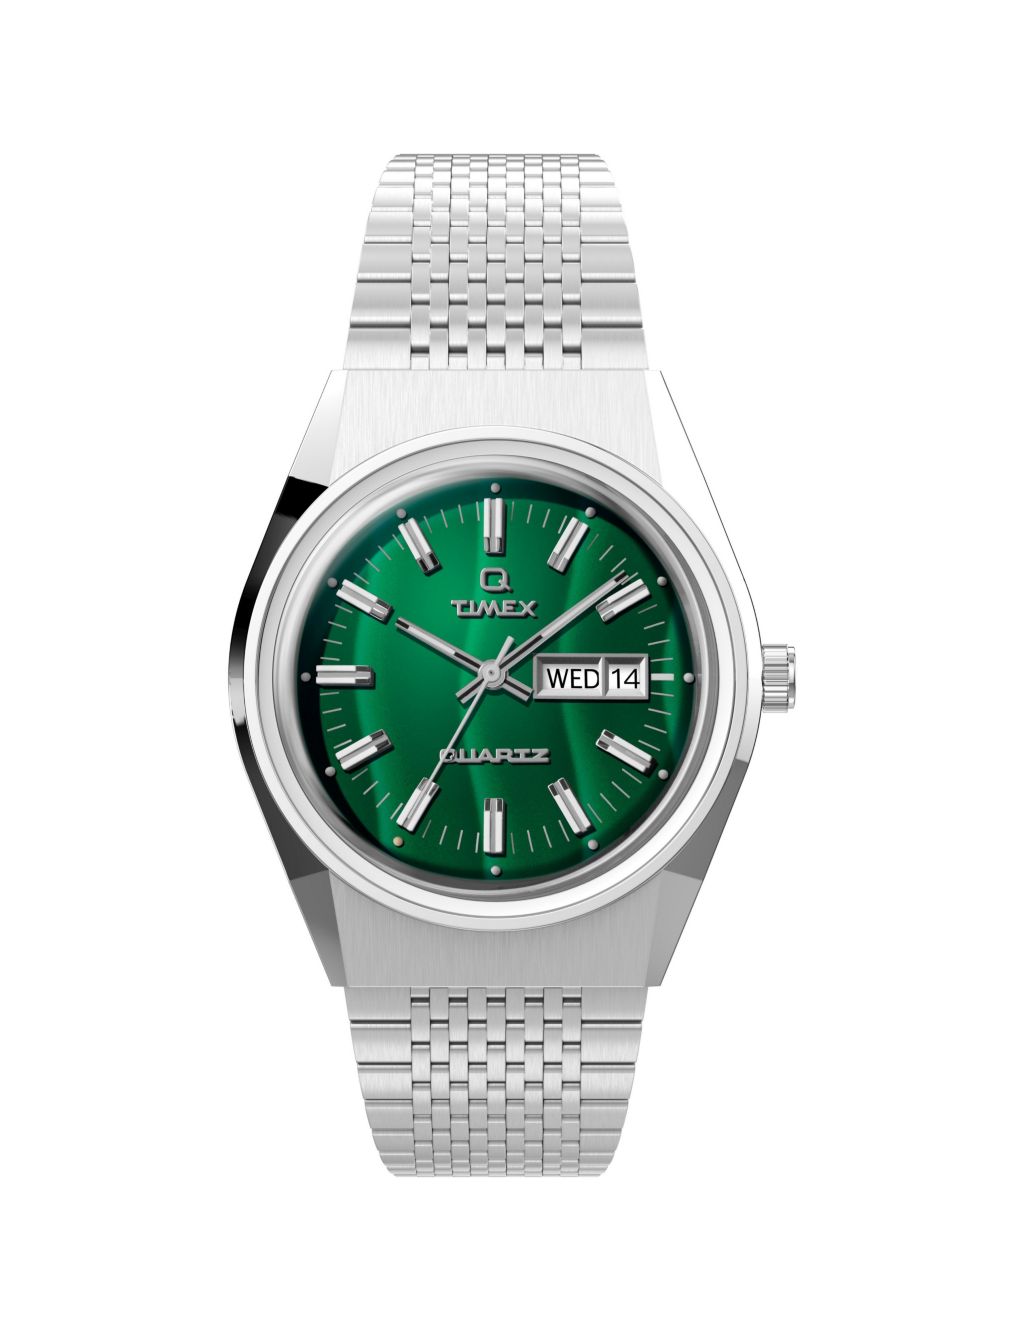 Timex Q Falcon Eye Stainless Steel Watch image 1